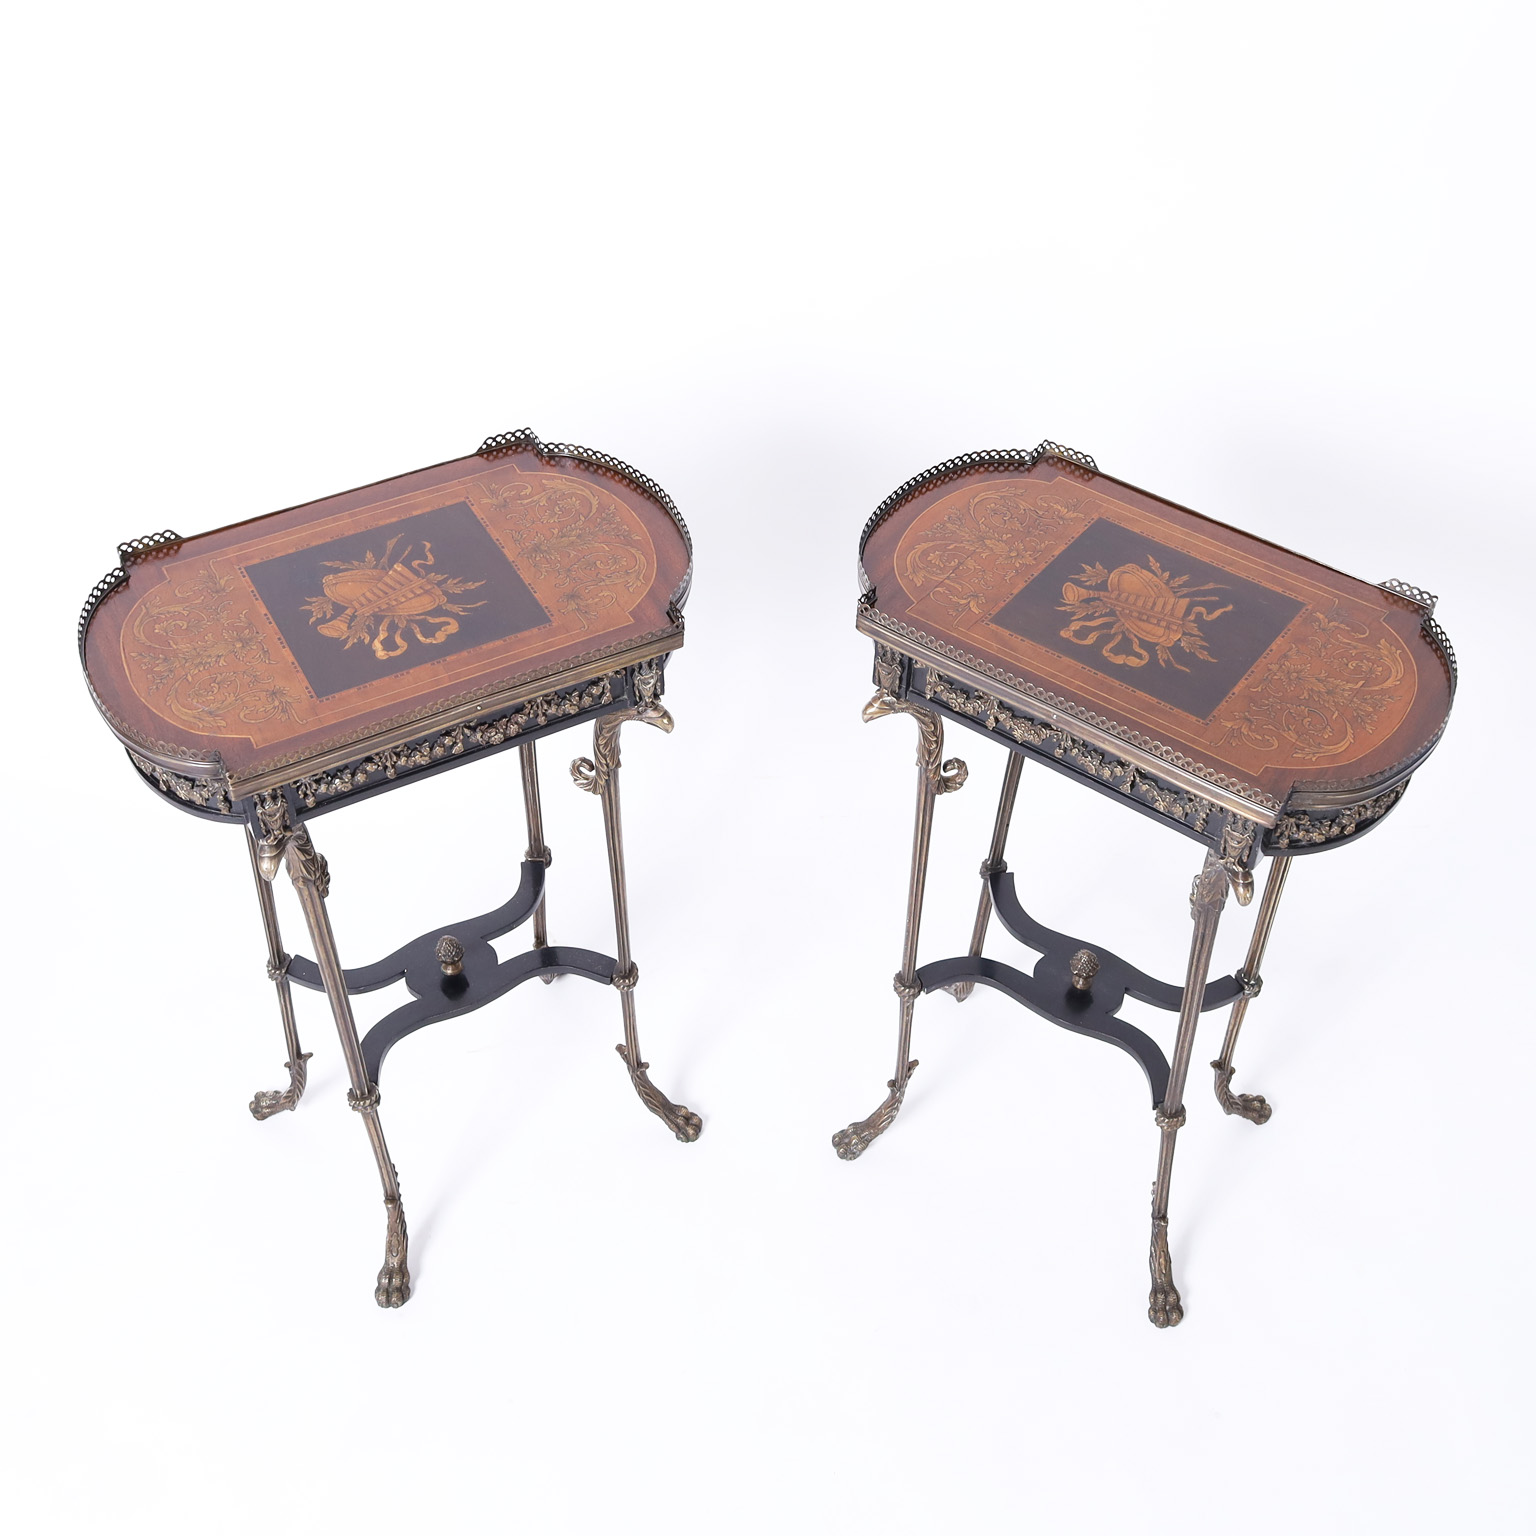 Pair of Antique French Inlaid Tables or Stands